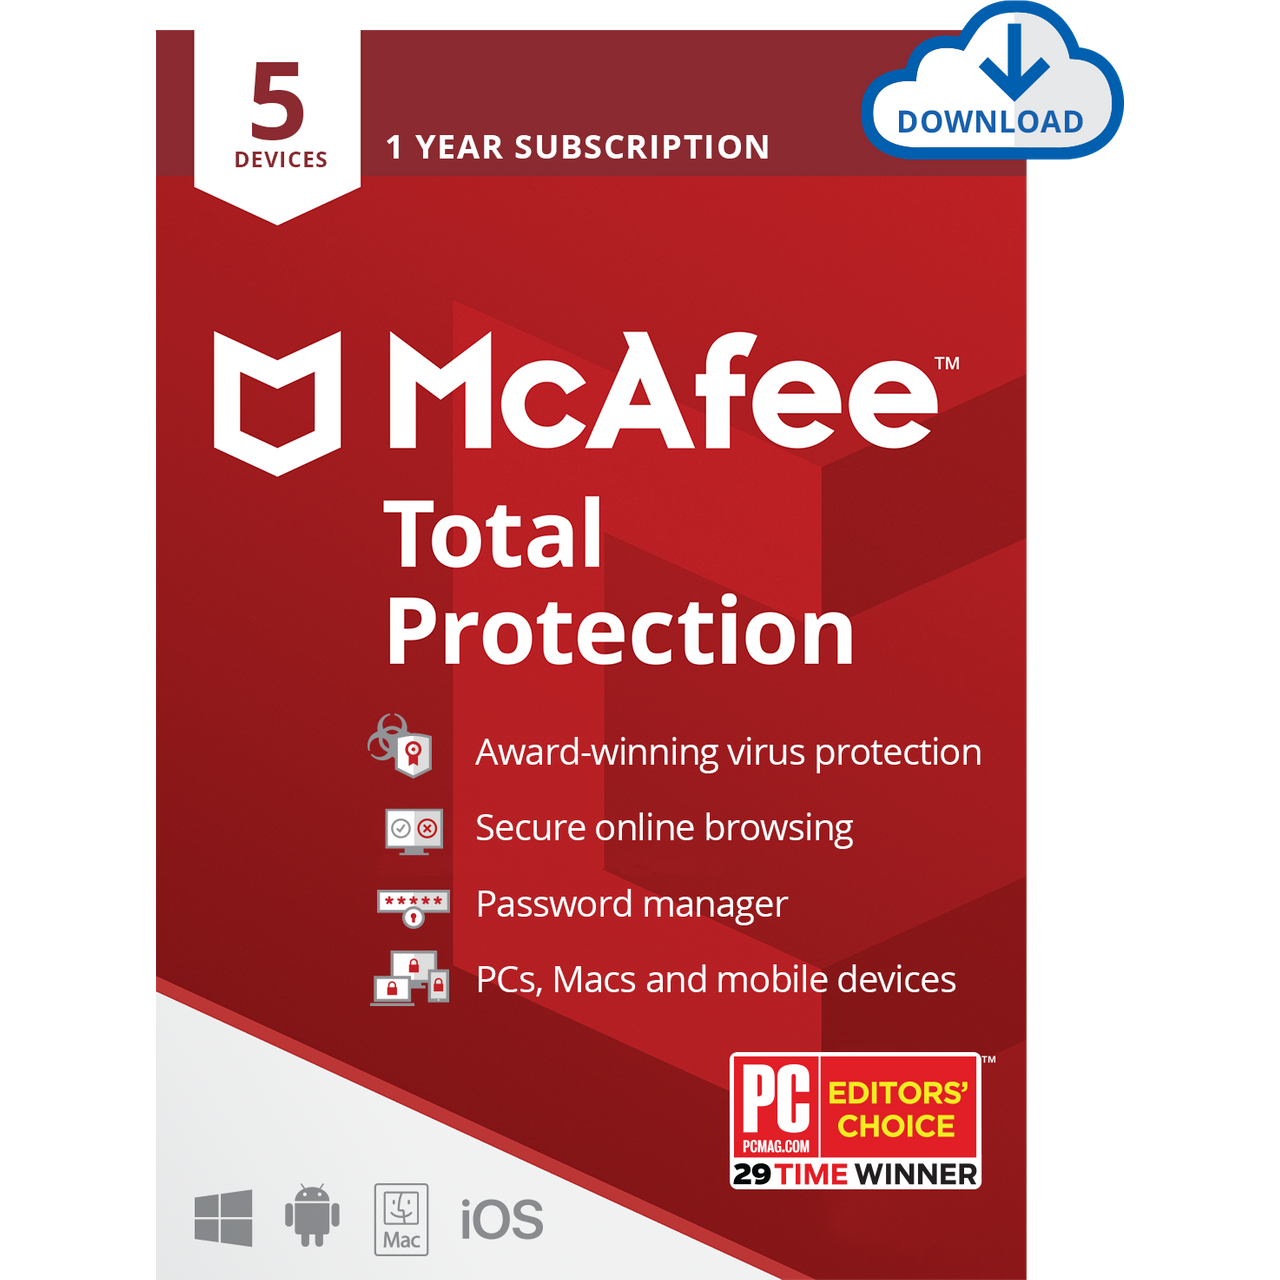 McAfee Total Protection Digital Download for 5 Devices Review